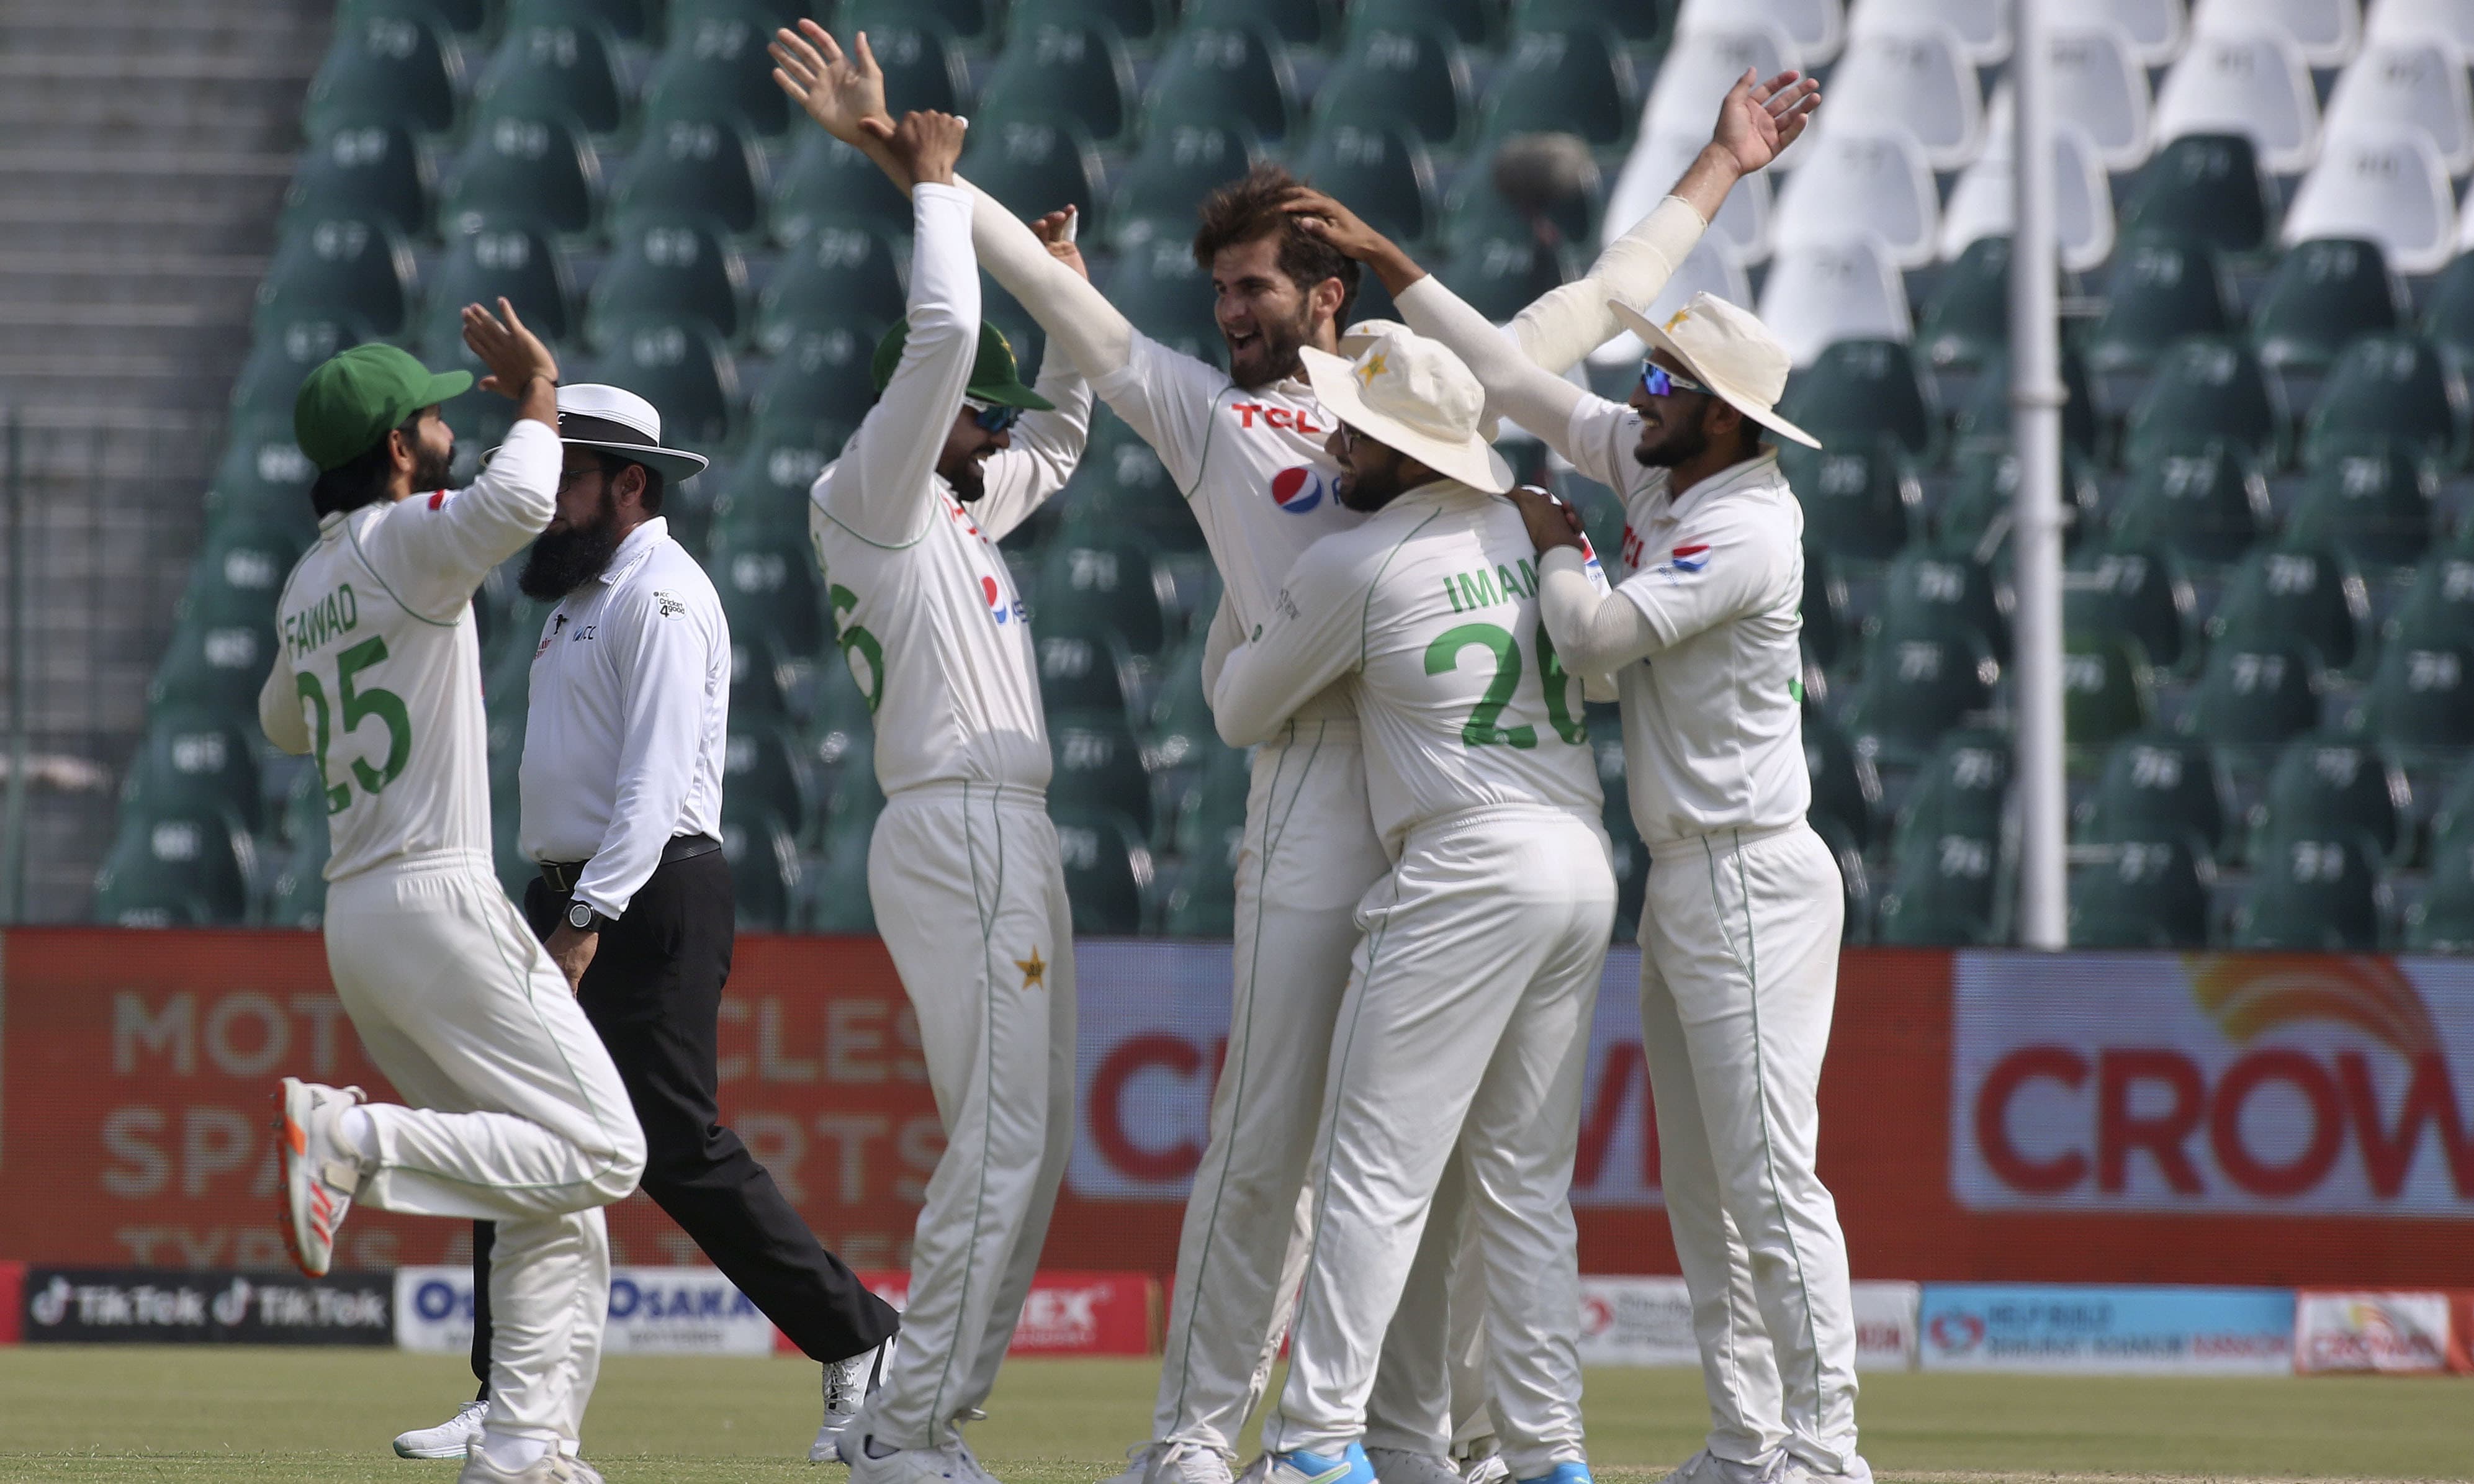 Pakistan's Shaheen Shah Afridi, centre, celebrates with teammates after the dismissal of Australia's Marnus Labuschagne on the first day of the third Test between Pakistan and Australia at the Gaddafi Stadium in Lahore on Monday. — AP